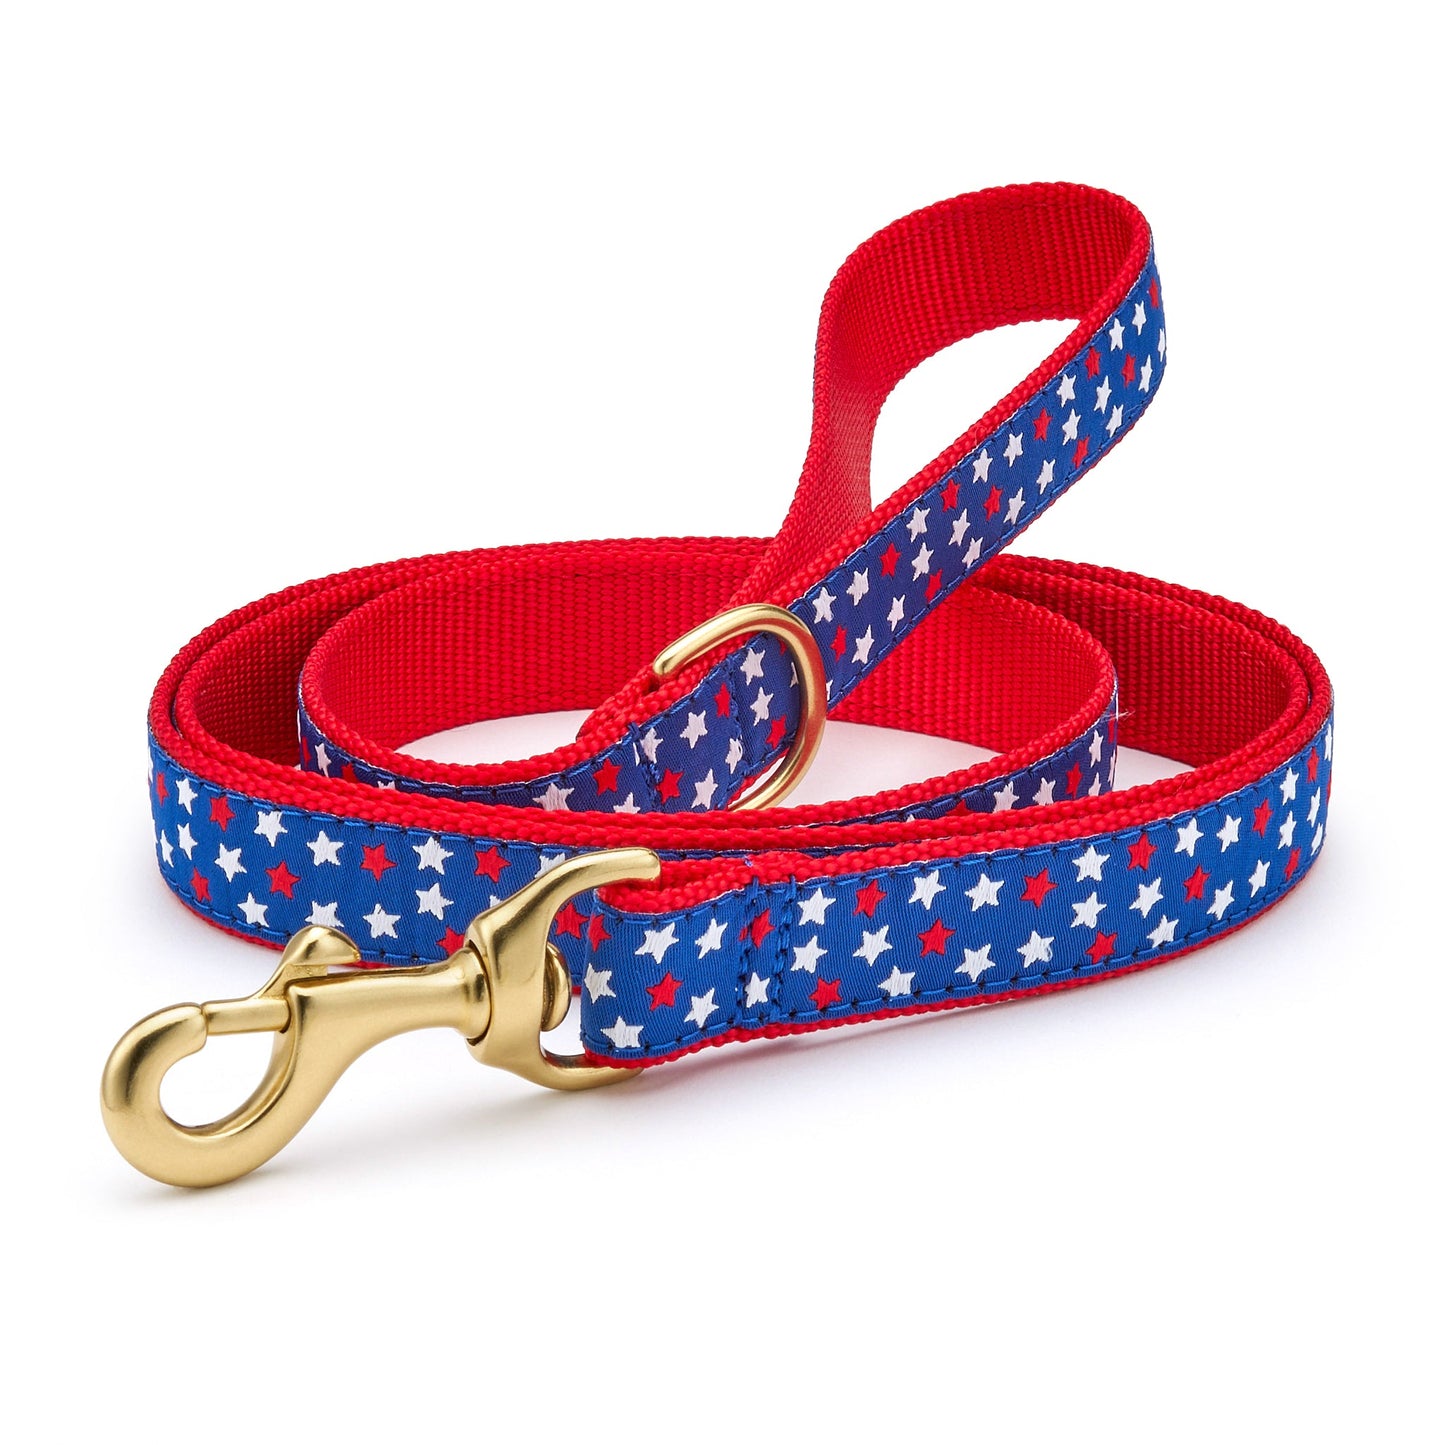 New Stars Dog Lead by Up Country look